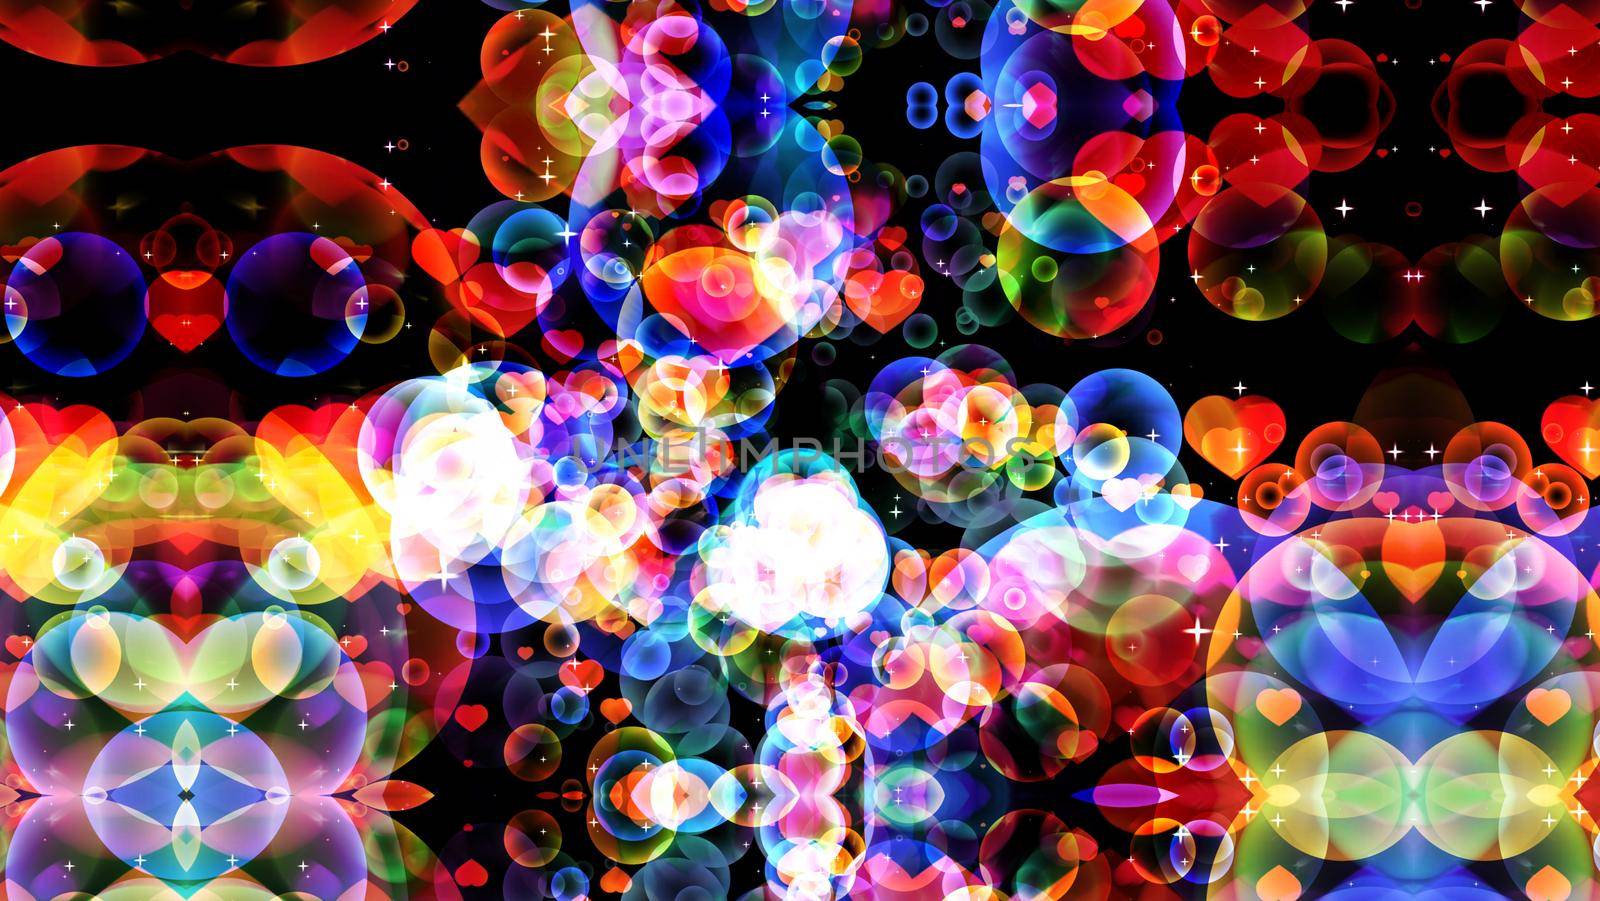 reflection dark abstract dimension rainbow bubbles with dancing hearts floating by Darkfox